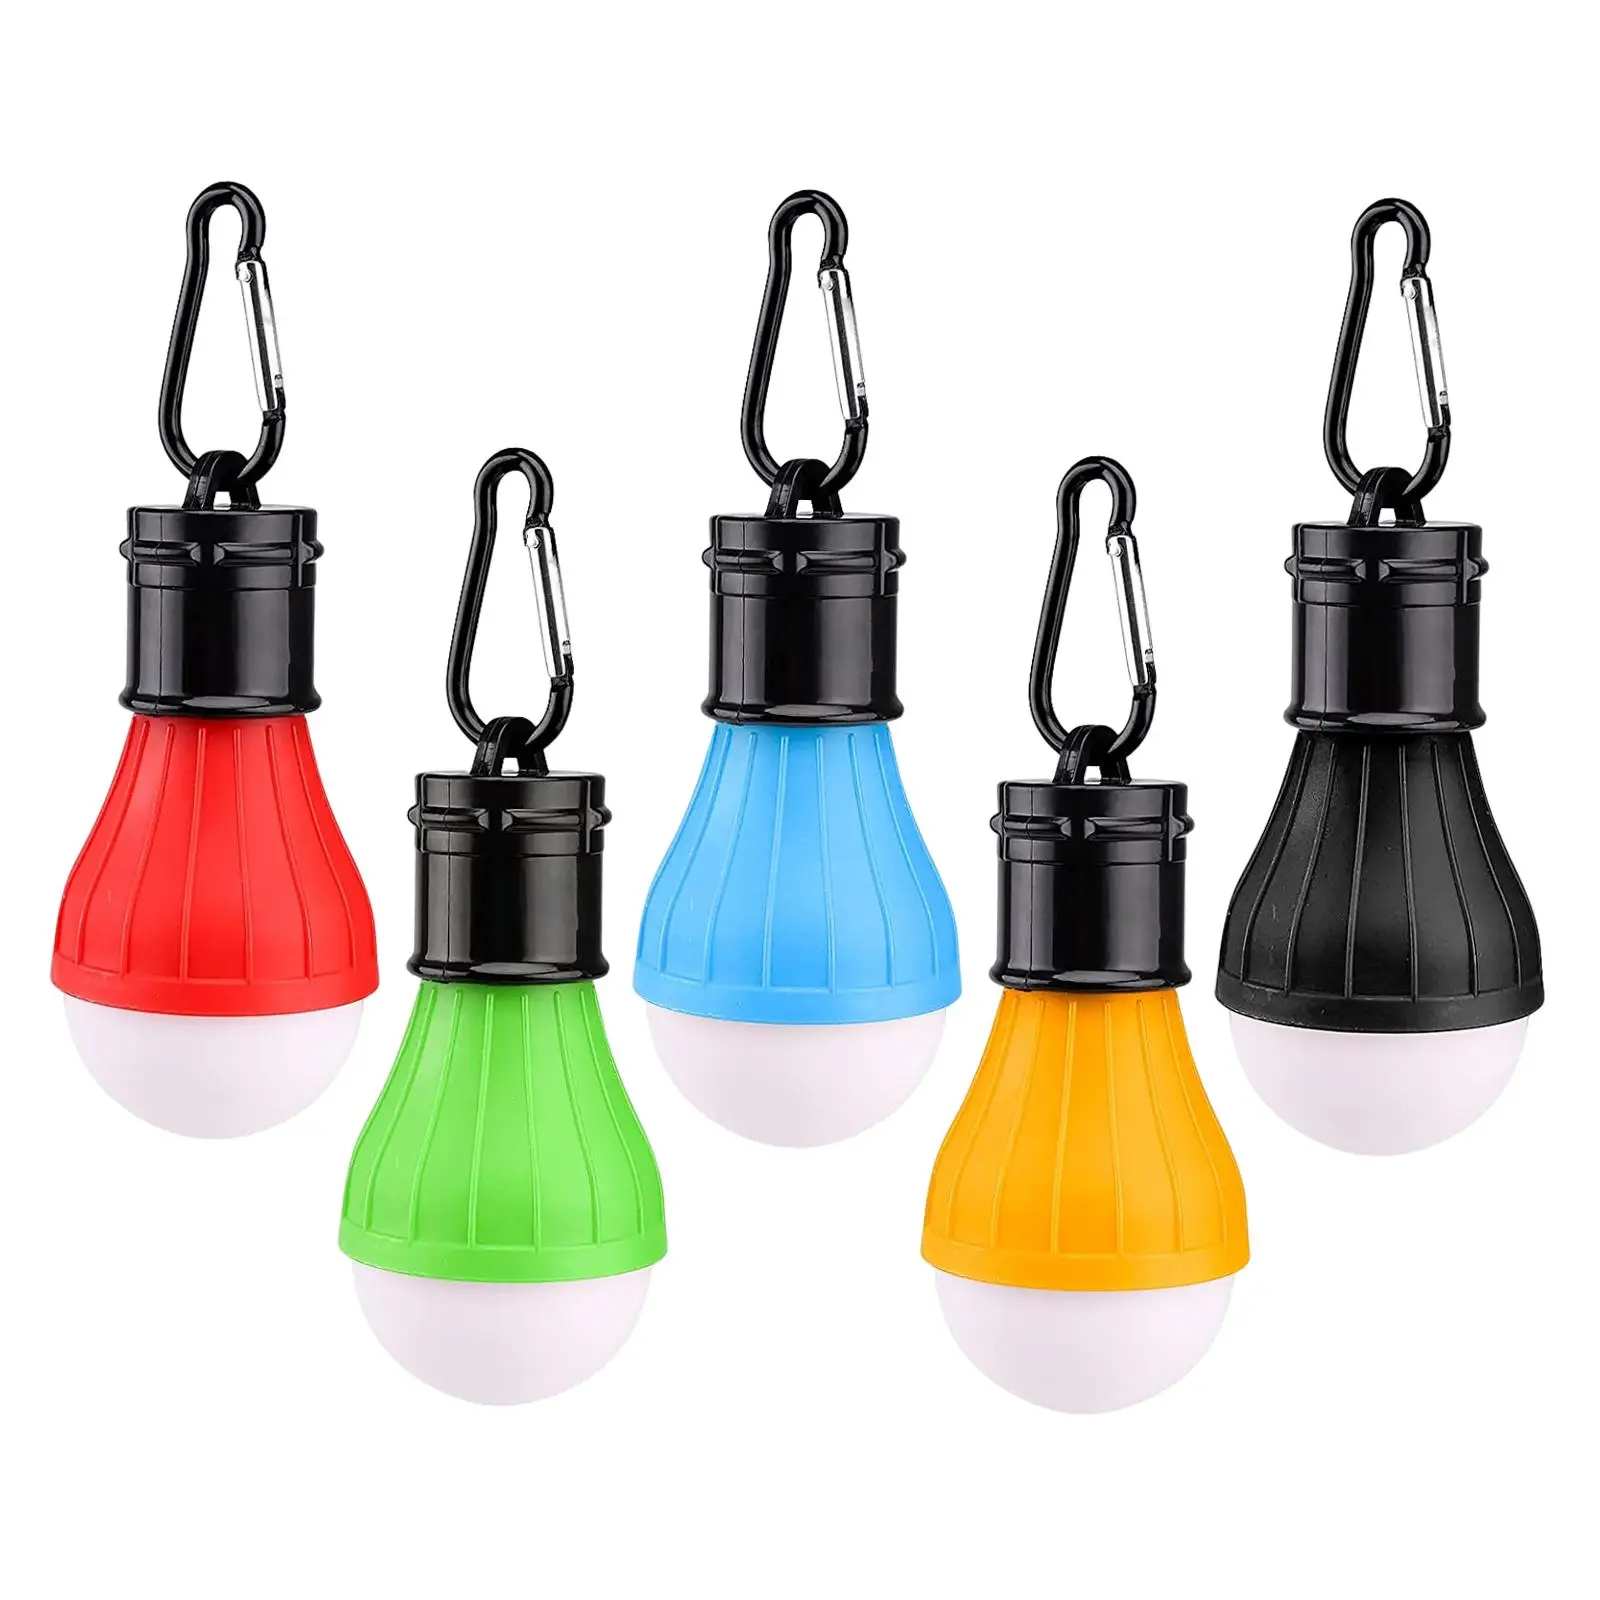 5Pcs Camping Lantern Light Tent Lamp Waterproof 3 Modes with Carabiner Clips Hanging Battery Powered for Car Repairing Indoor